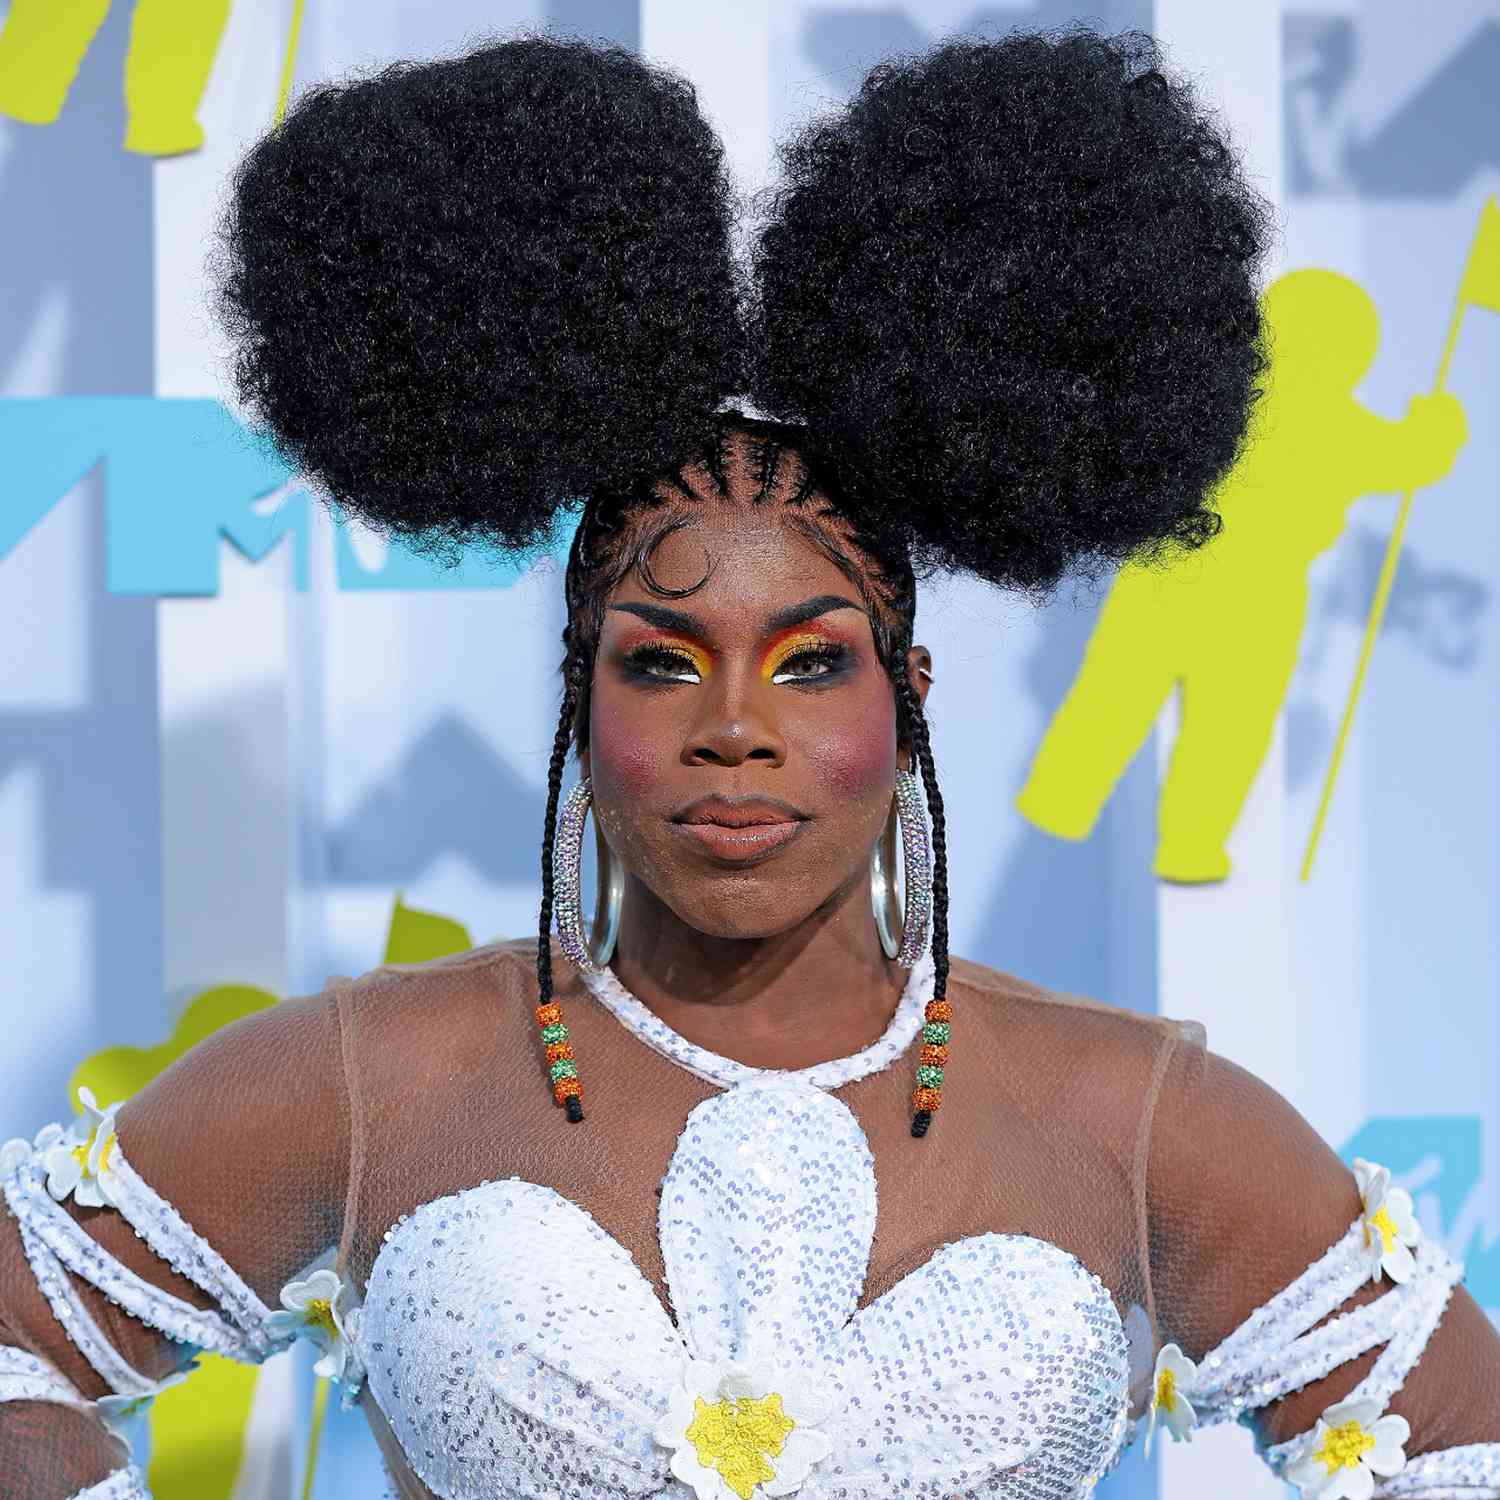 Monet X Change with two fluffy afro puffs